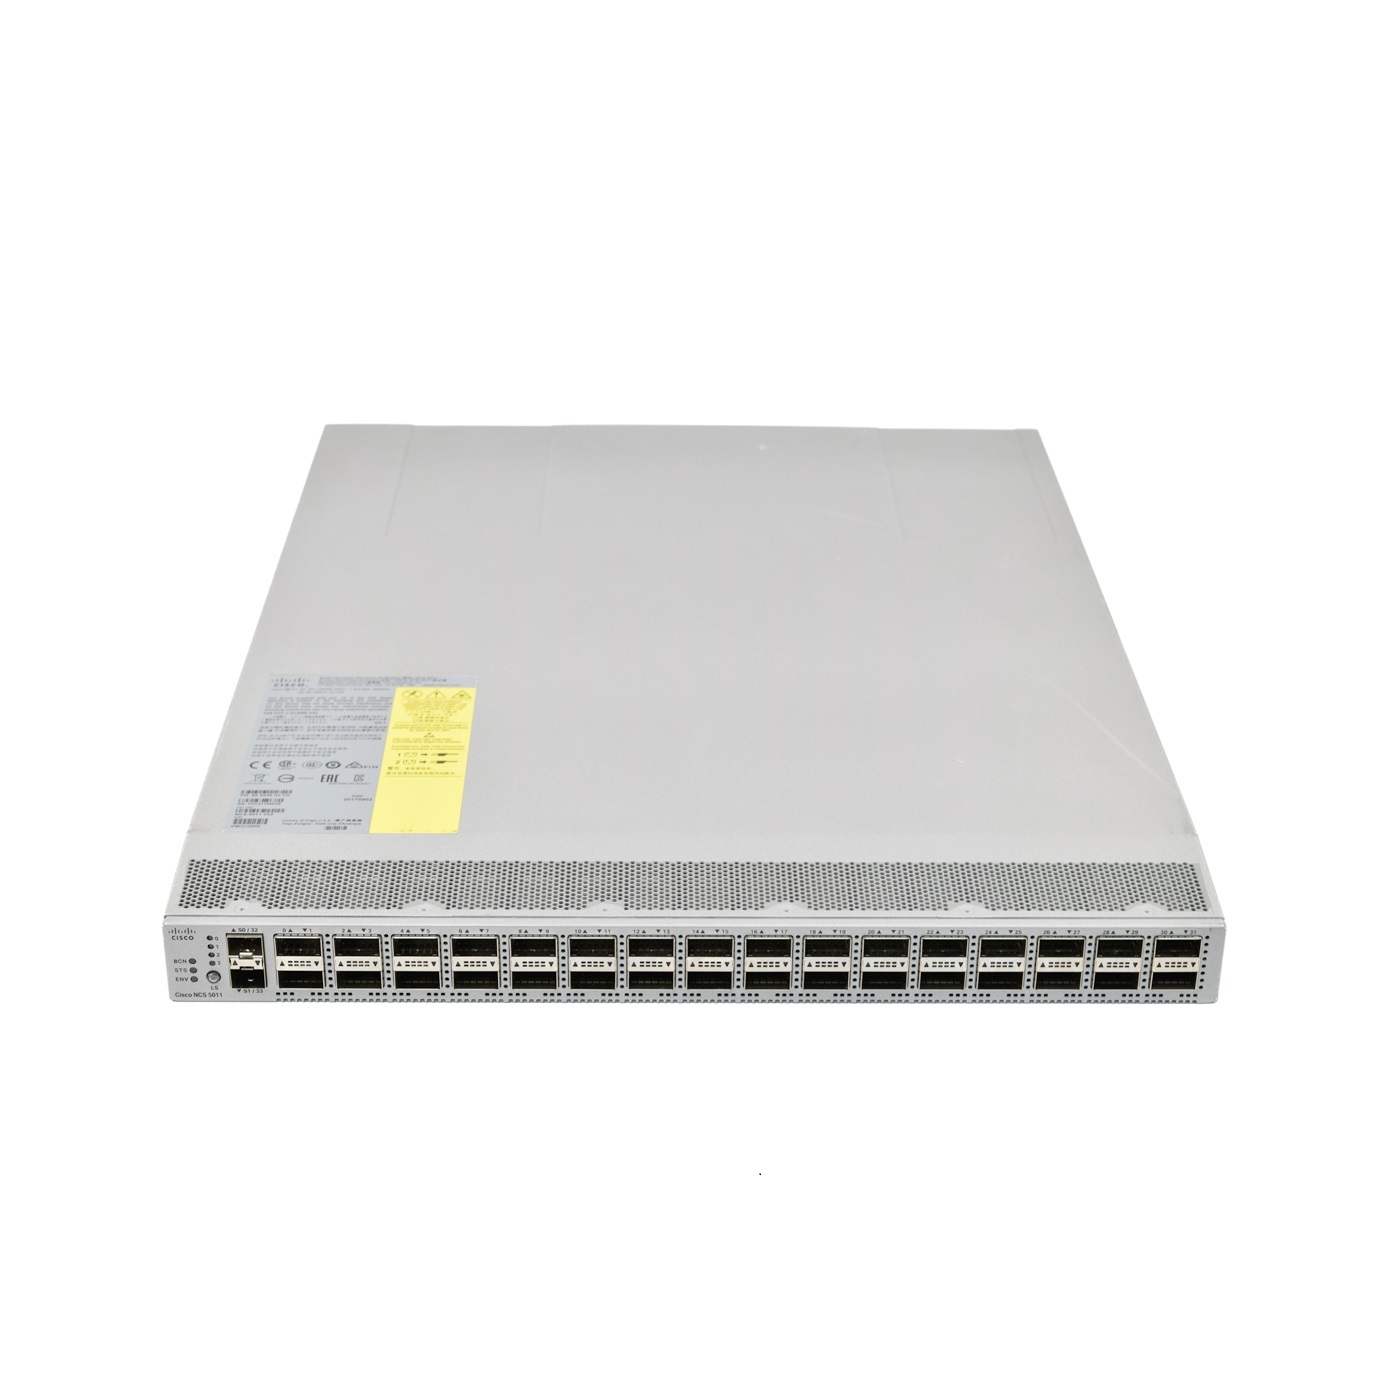 Network Convergence System 5011 